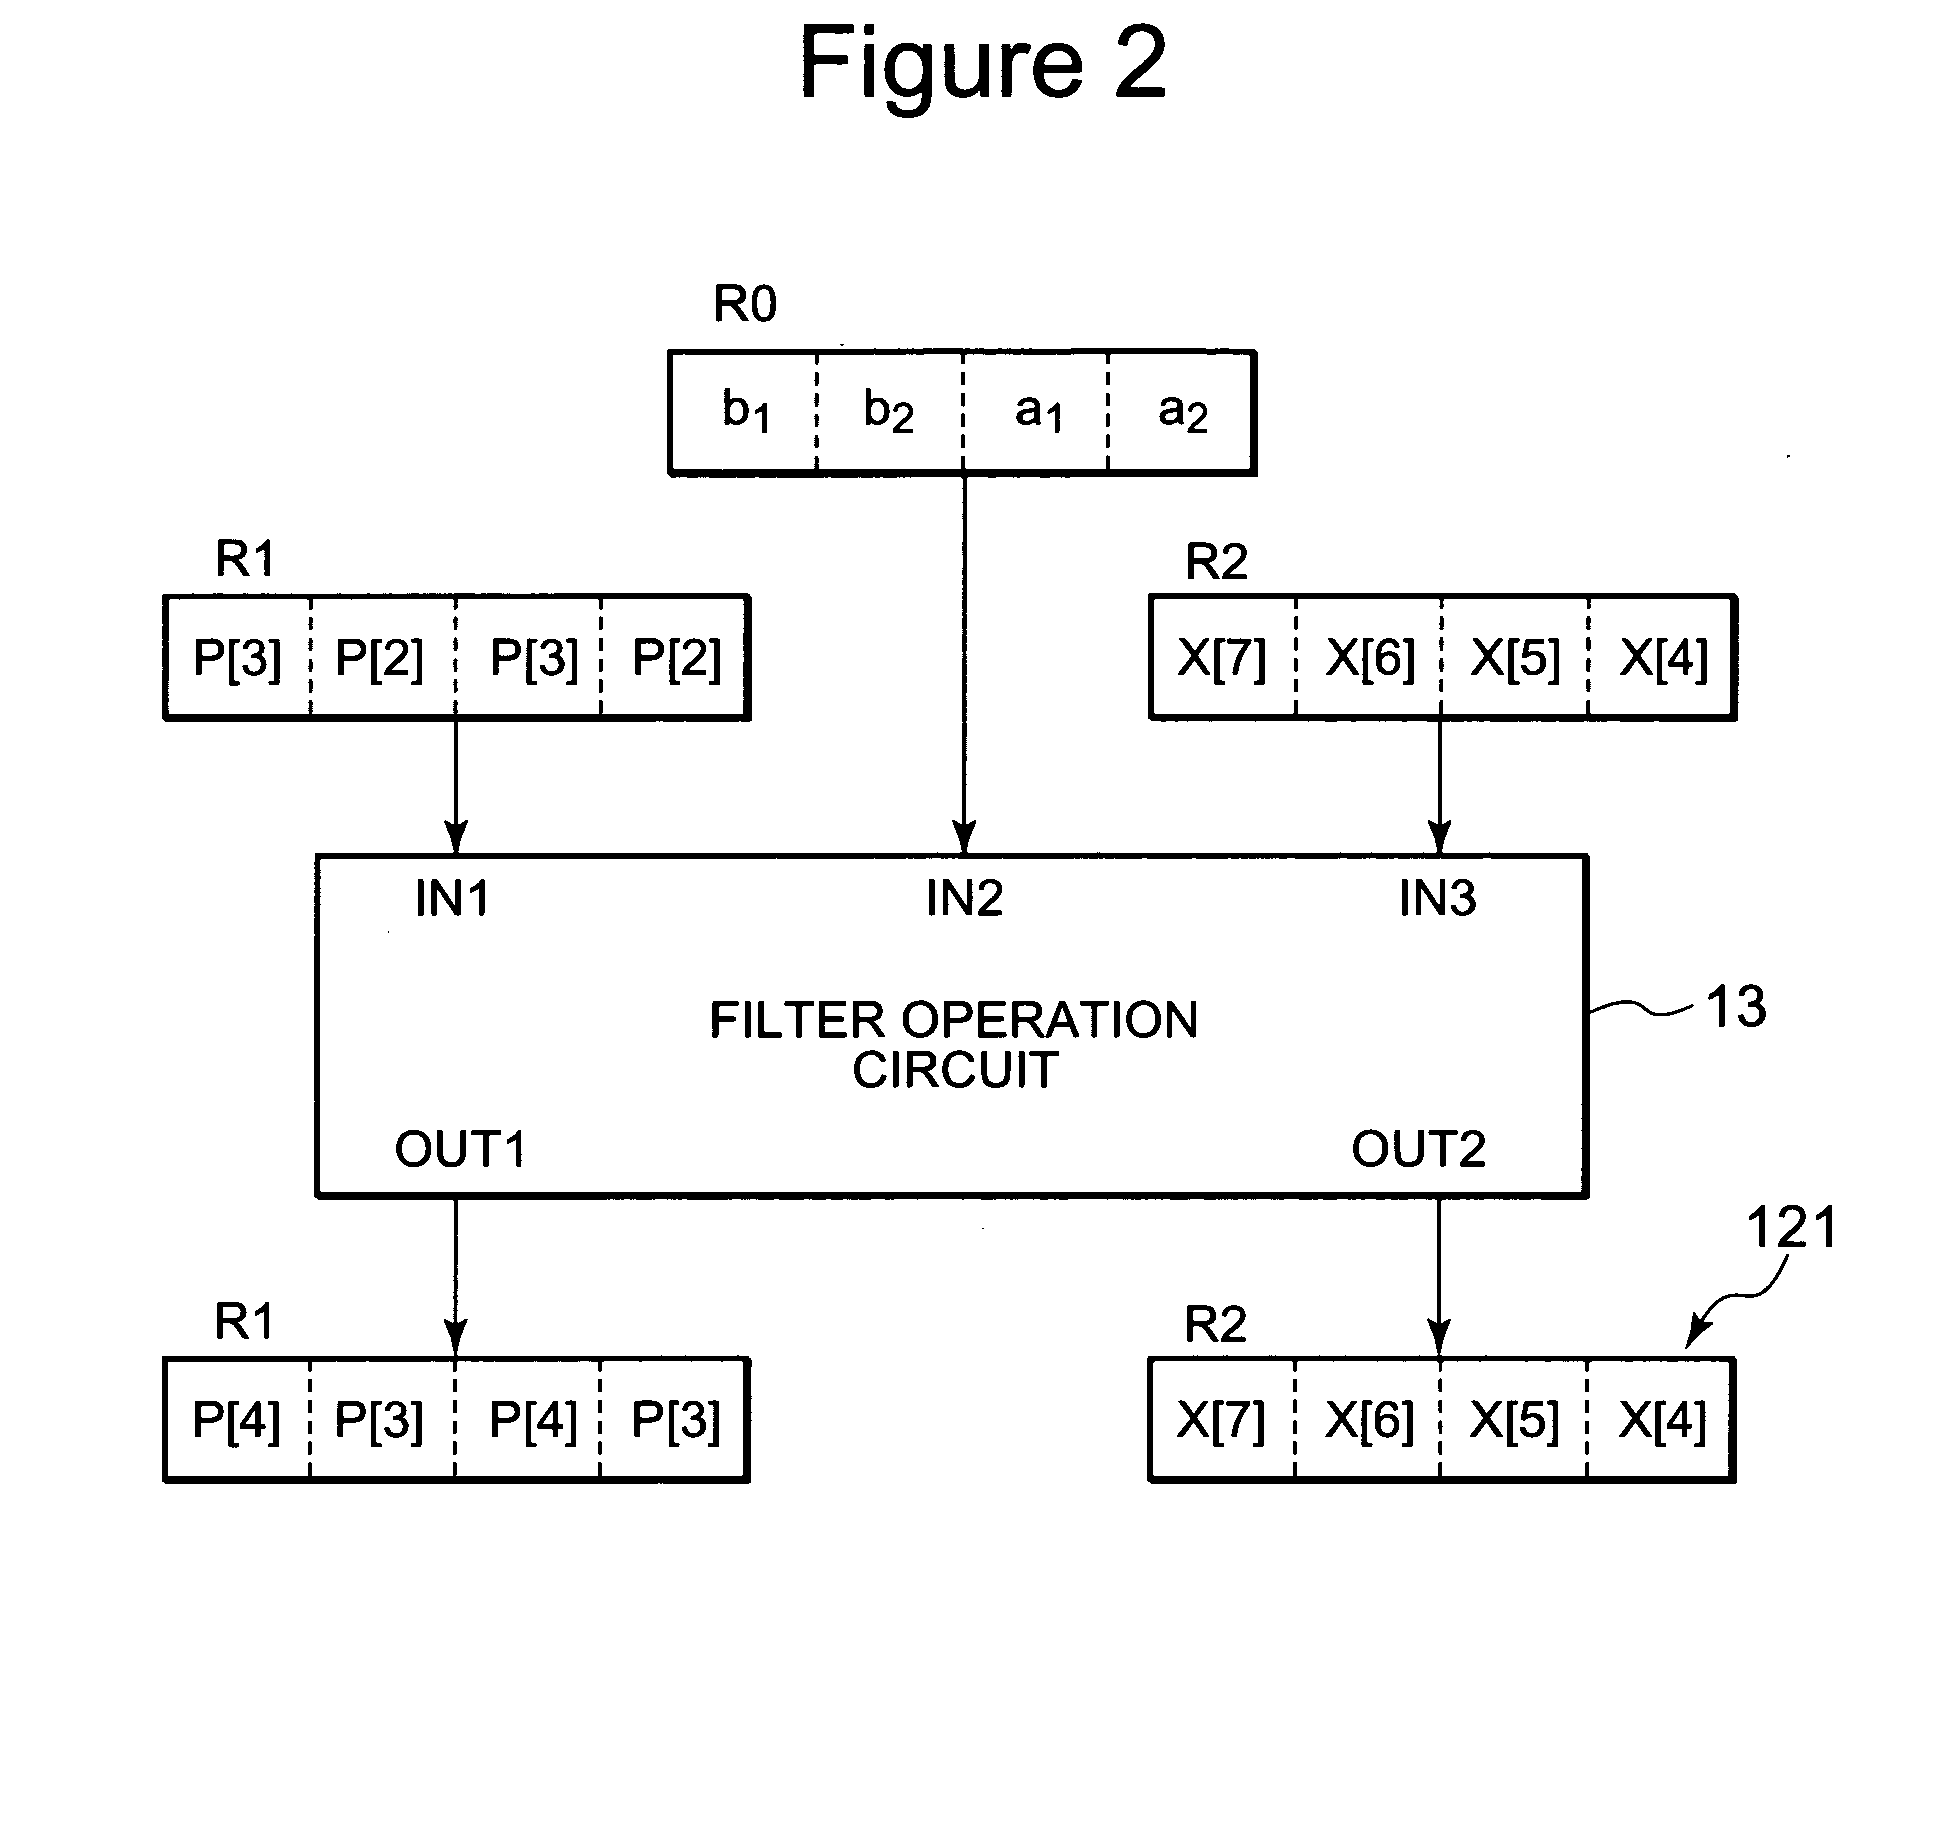 Microprocessor performing IIR filter operation with registers